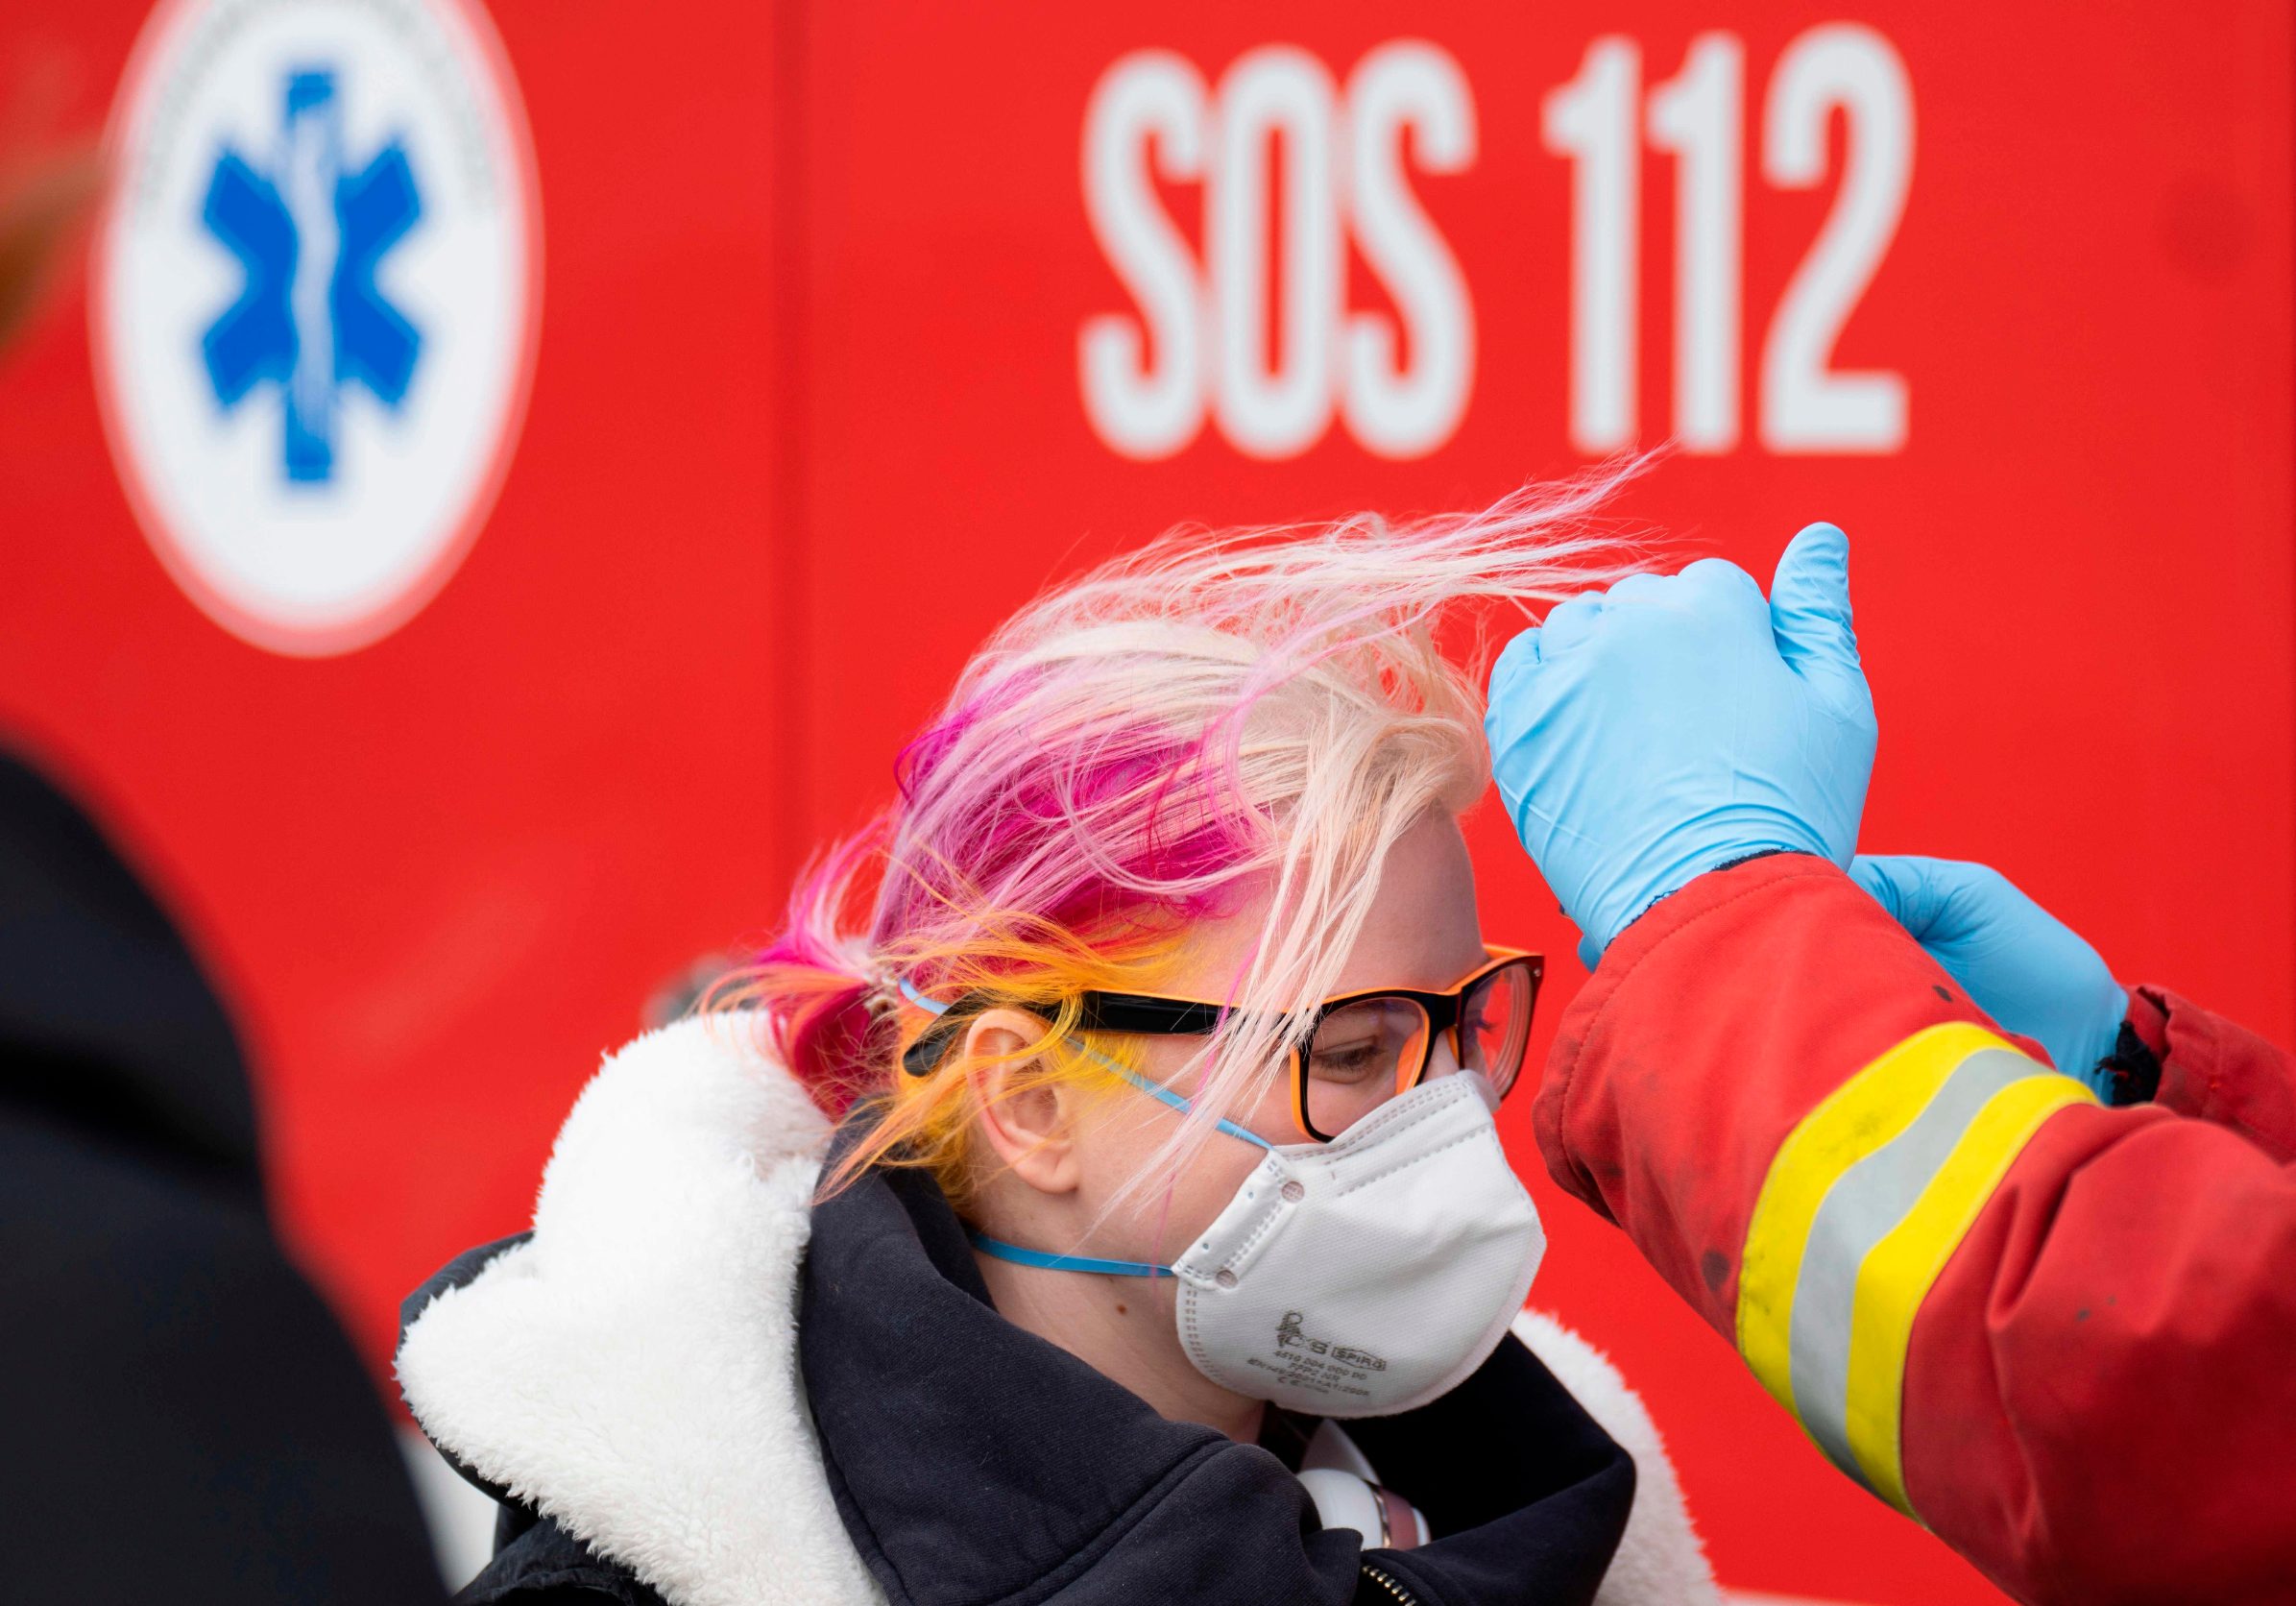 A Slovak firefighter checks the temperature of a woman wearing a protective facemask due to the coronavirus COVID-19 crossing the Bratislava-Jarovce border crossing between Austria and Slovakia on March 13, 2020. - The Slovak government has reintroduced controls along its borders with the exception of the Slovak-Polish border to prevent the new coronavirus from further spreading. Slovakia now only allows Slovak nationals to enter the country, or foreigners holding a Slovakian residency permit. All entrants will be isolated for 14 days. (Photo by JOE KLAMAR / AFP)